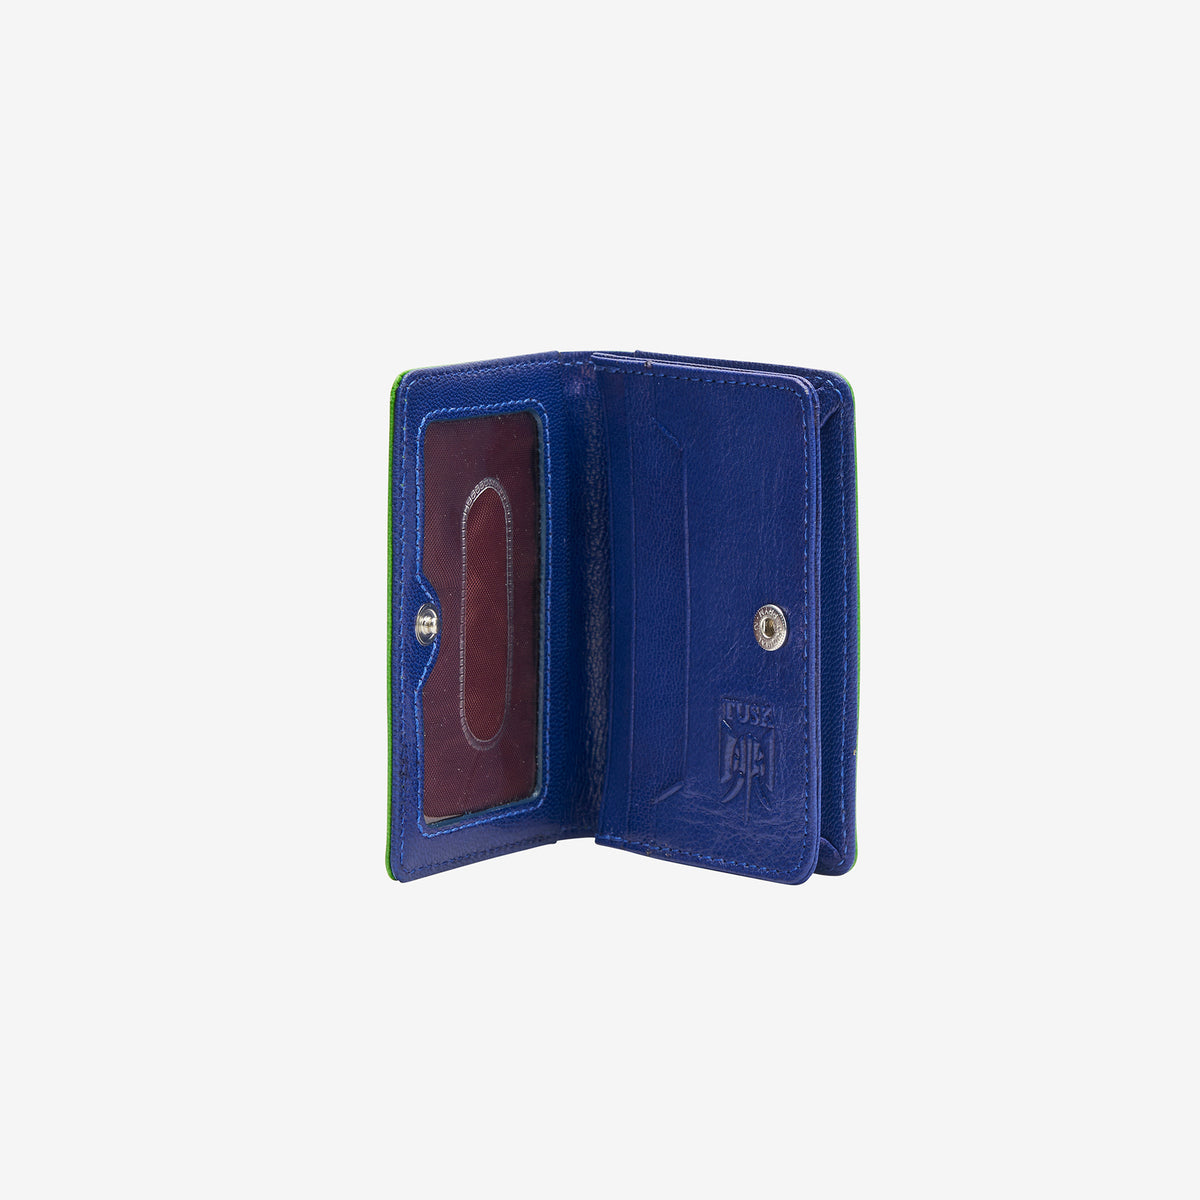     tusk-138-womens-siam-leather-gusseted-card-case-grass-and-indigo-open